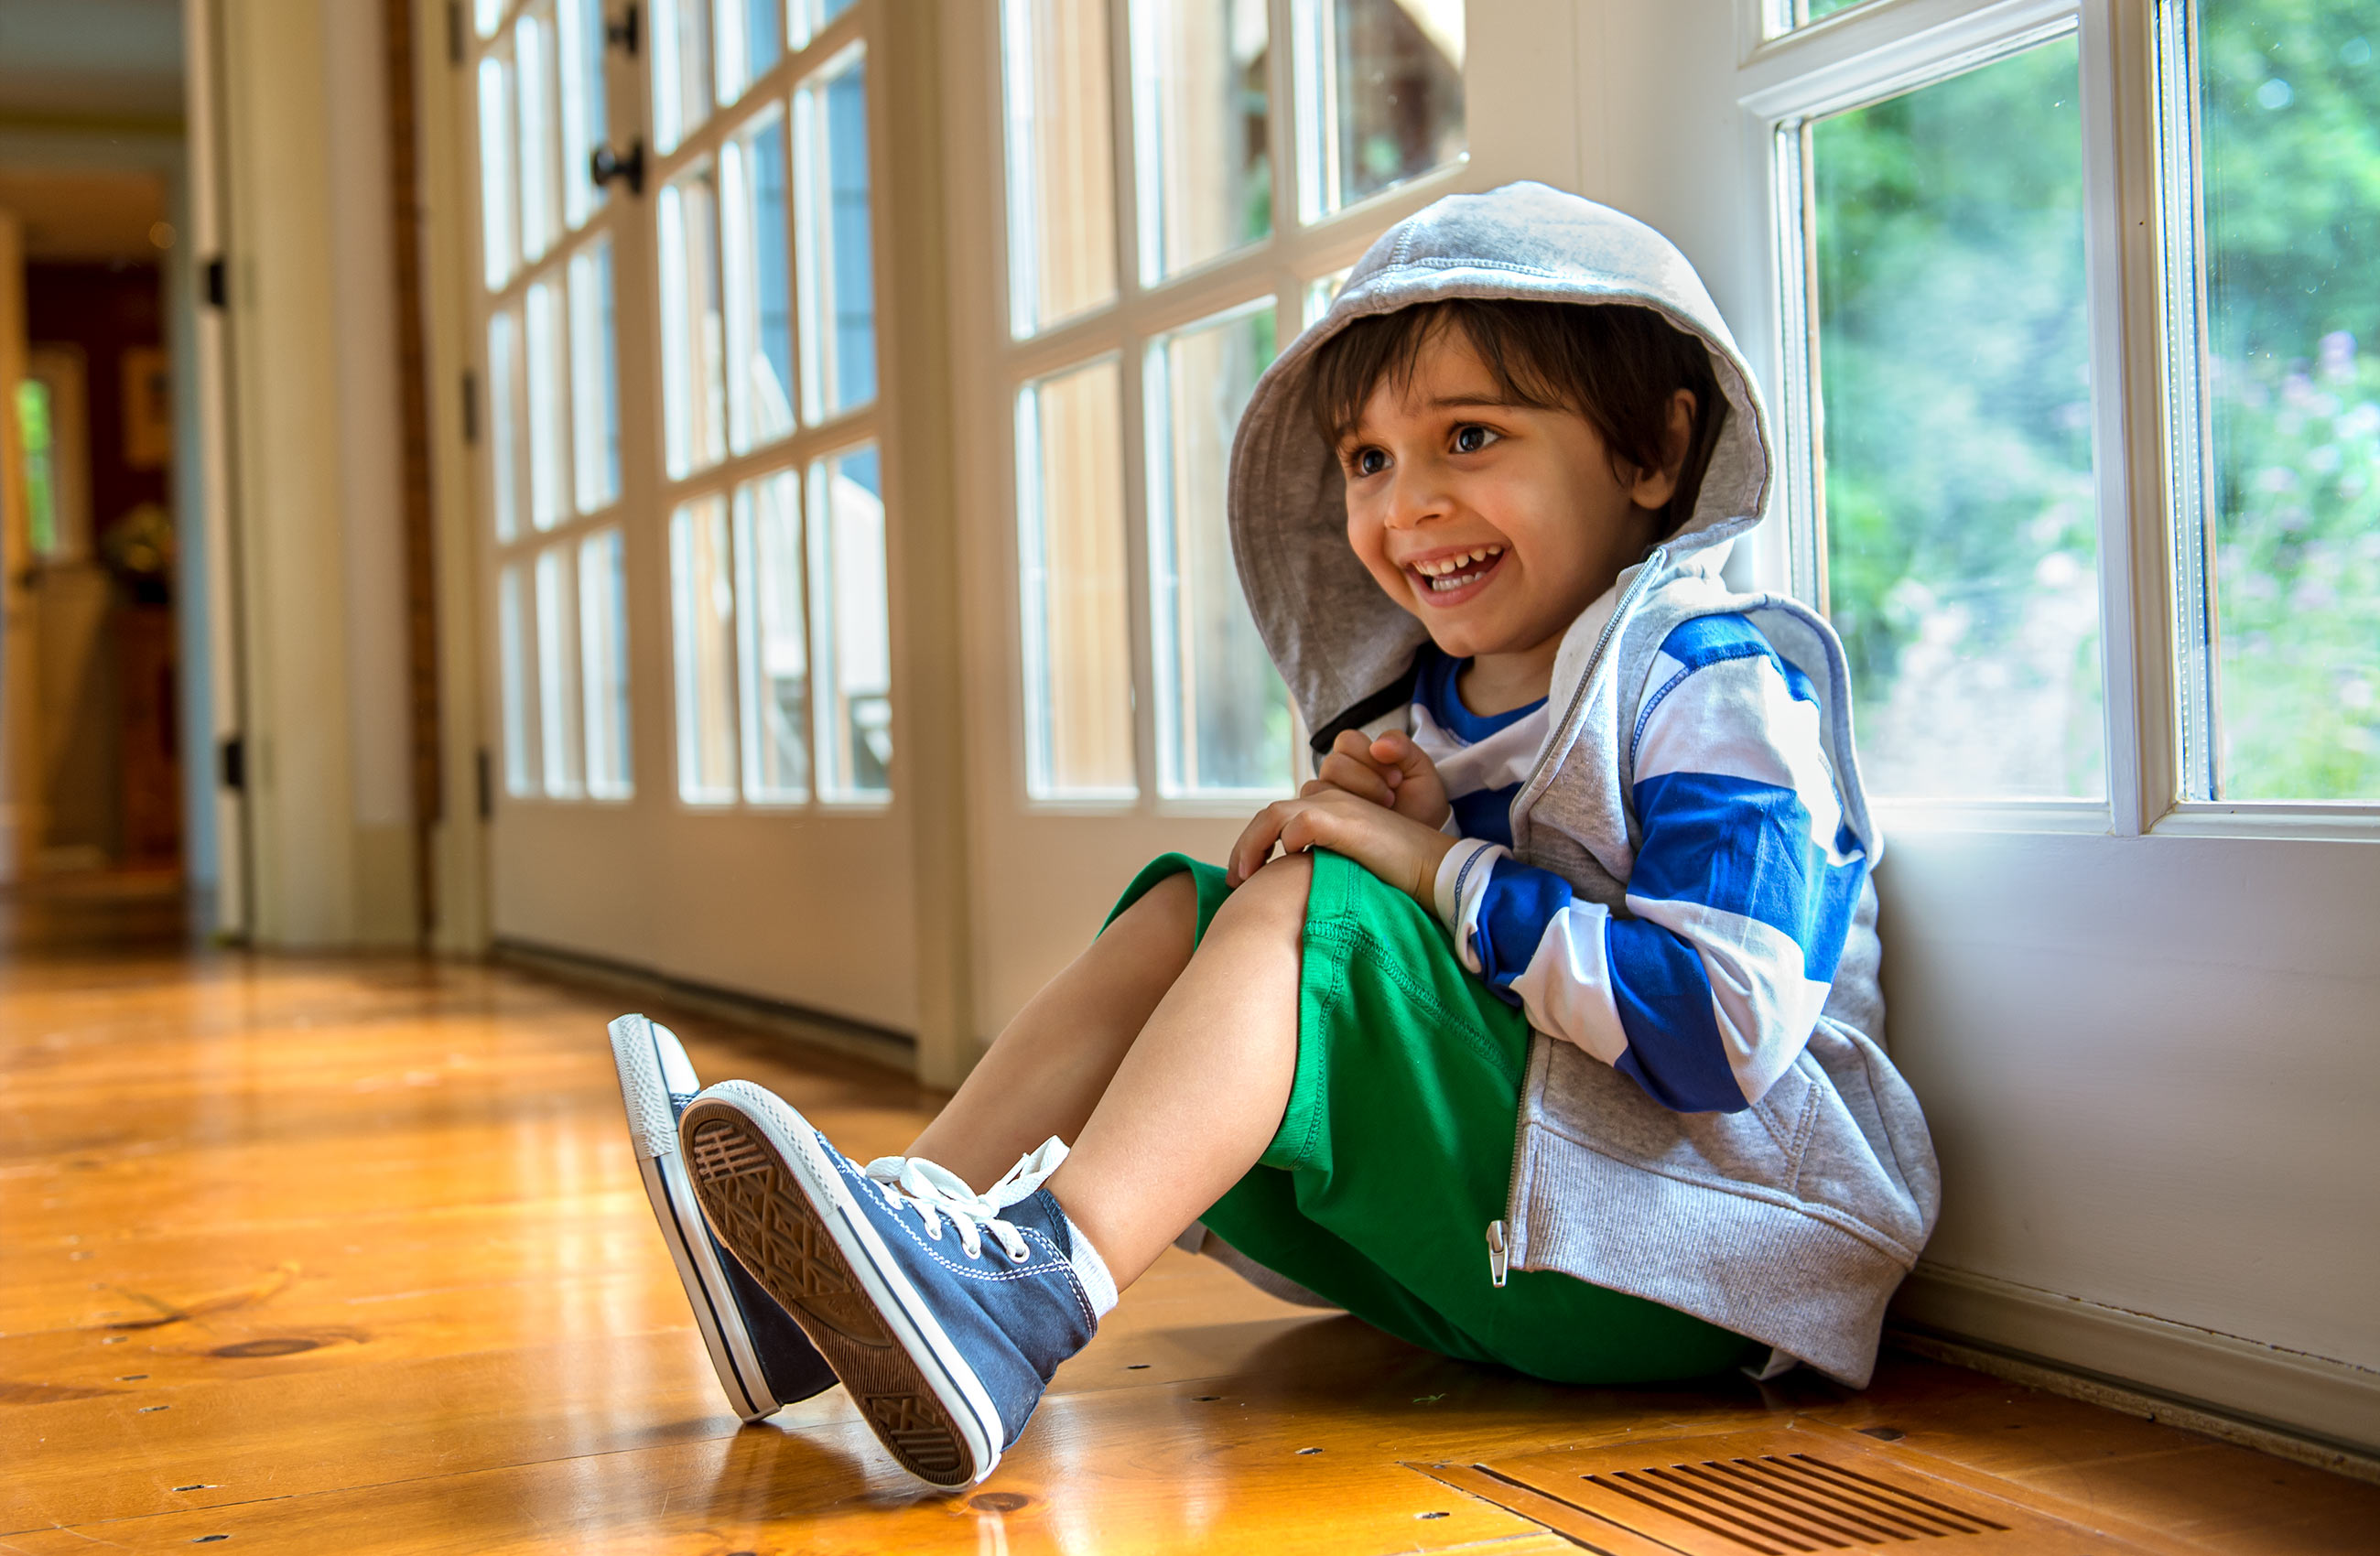 Little boy sits on wood floor leaning against wall of window s